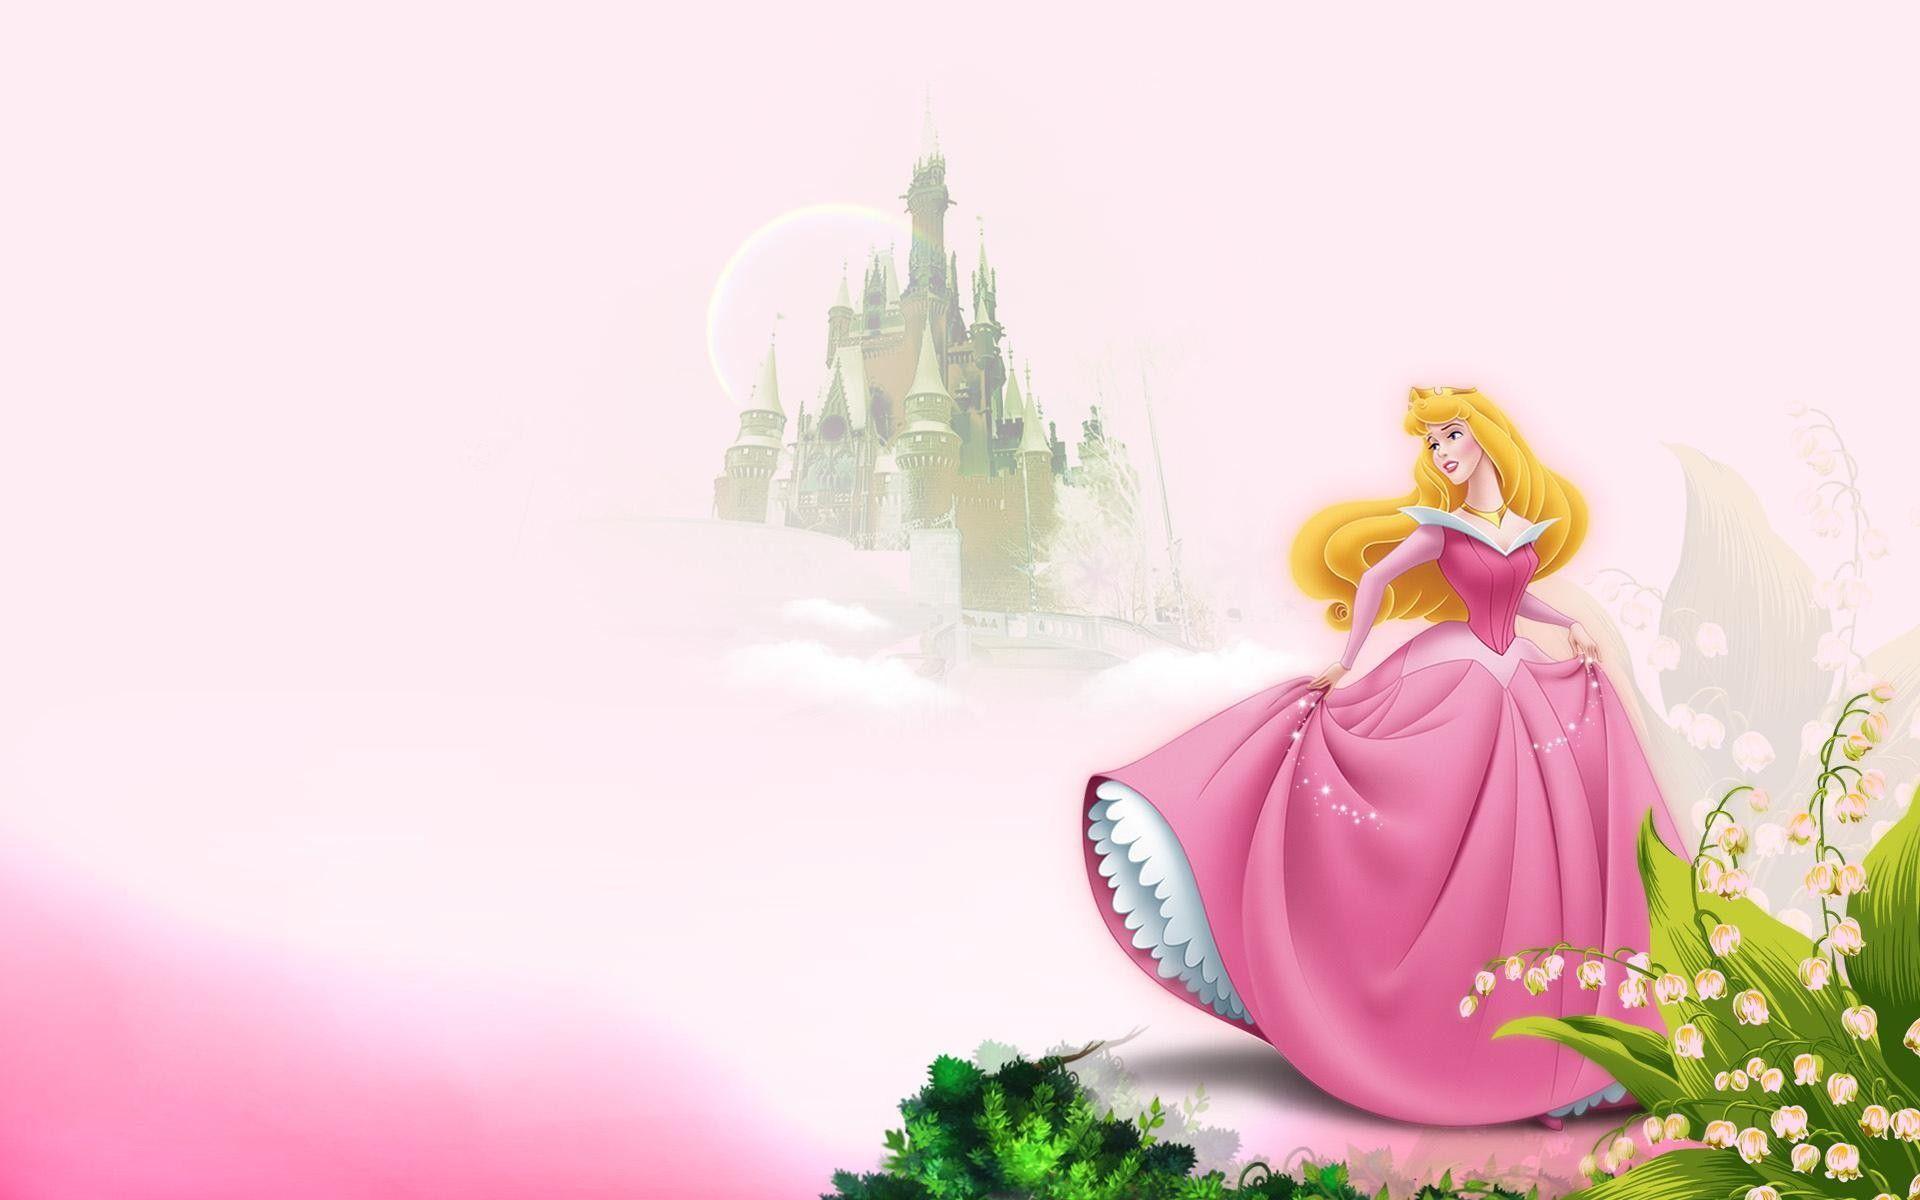 Princess backgroundDownload free awesome full HD background